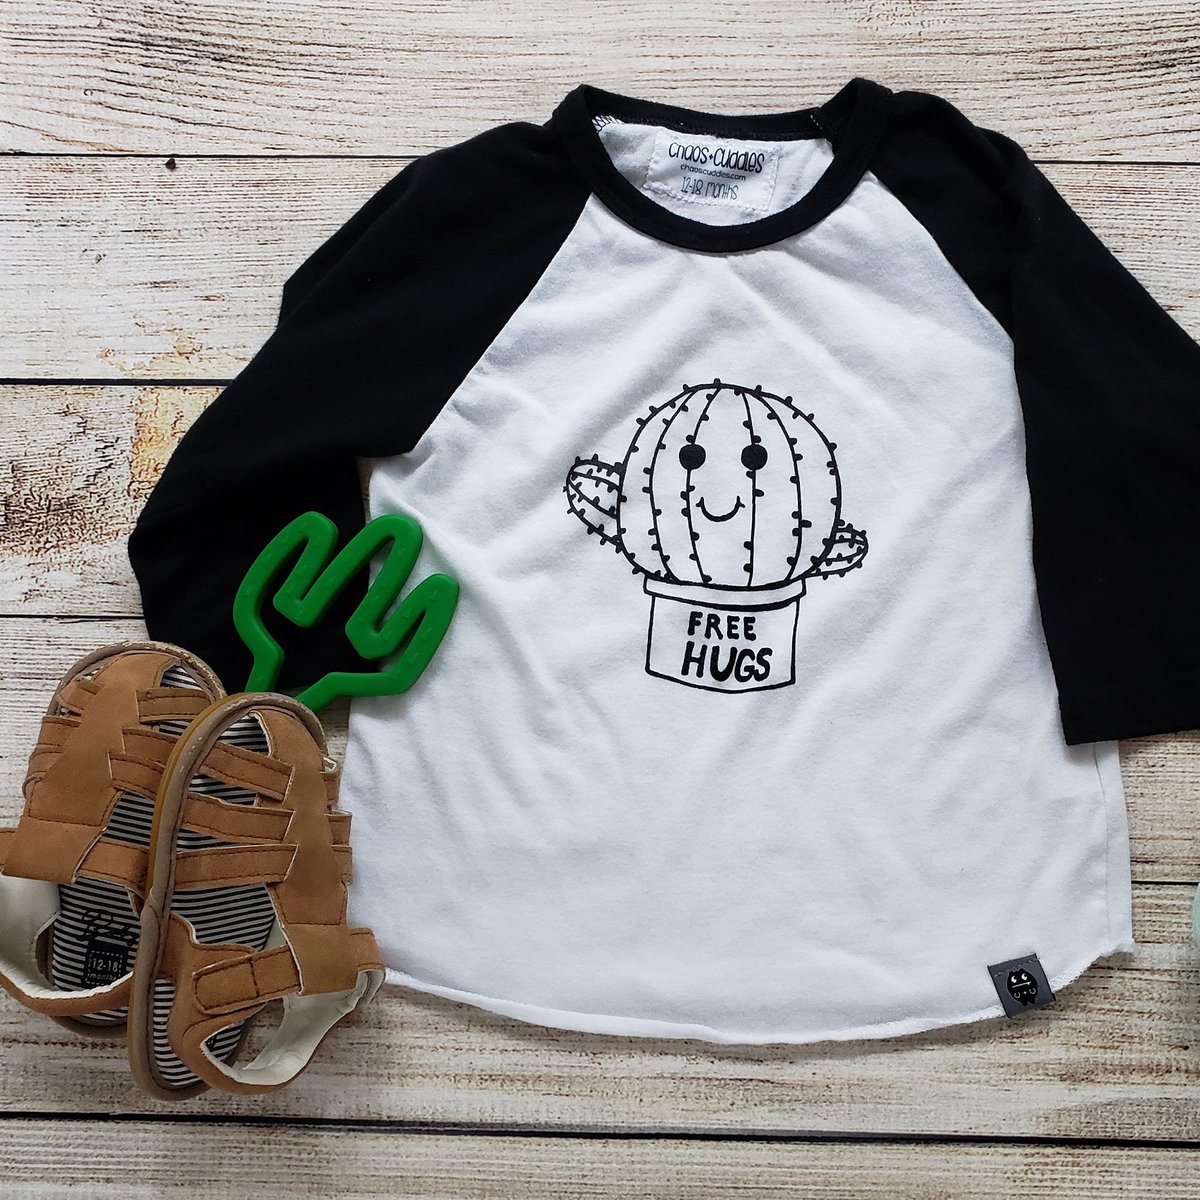 Who wouldn't want to cuddle such a cute little cactus? 😆🌵🌵

Grab one of our cactus raglan tees for your huggable little one today 😉

#chaosandcuddlesshop #trendybaby #trendykid #babyclothes #kidsclothes #hipsterbaby #hipsterkids #kidstyle #babystyle #smallshop #plantlover